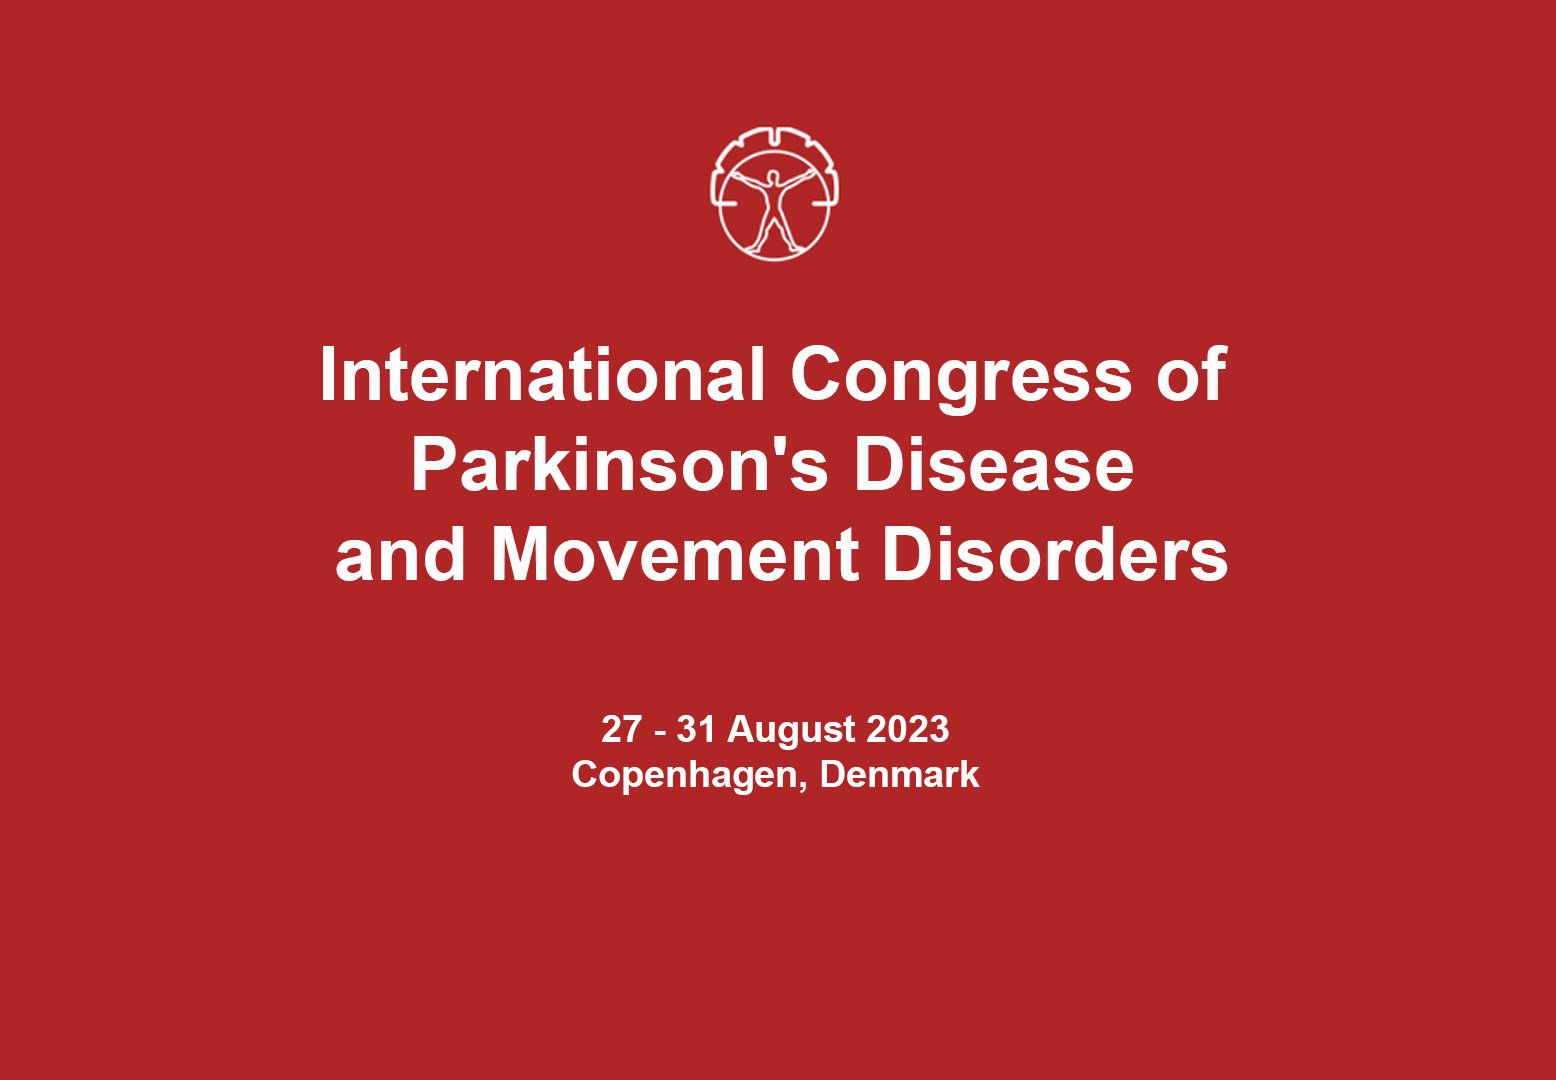 Meet us at the International Congress of Parkinson's Disease and Movement Disorders 2023